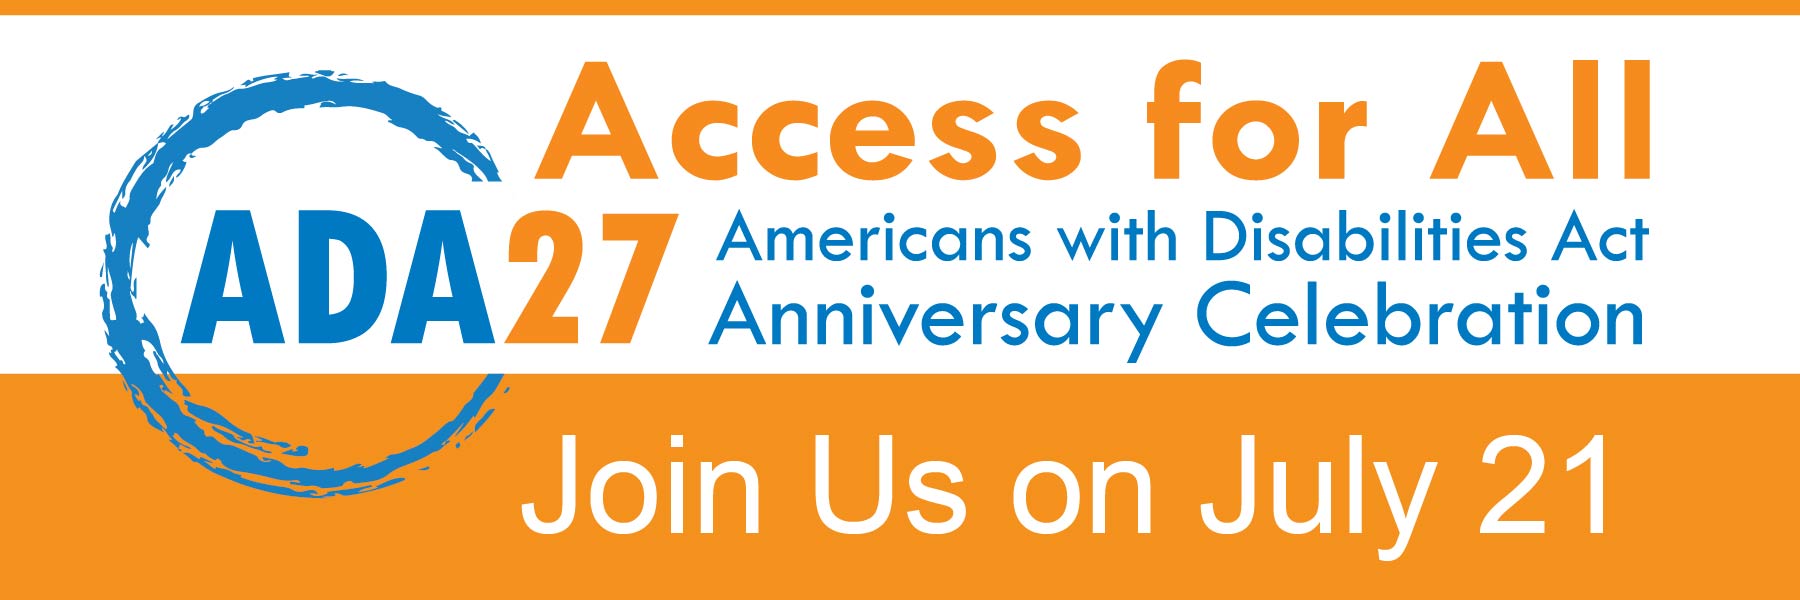 Access for All / ADA 27